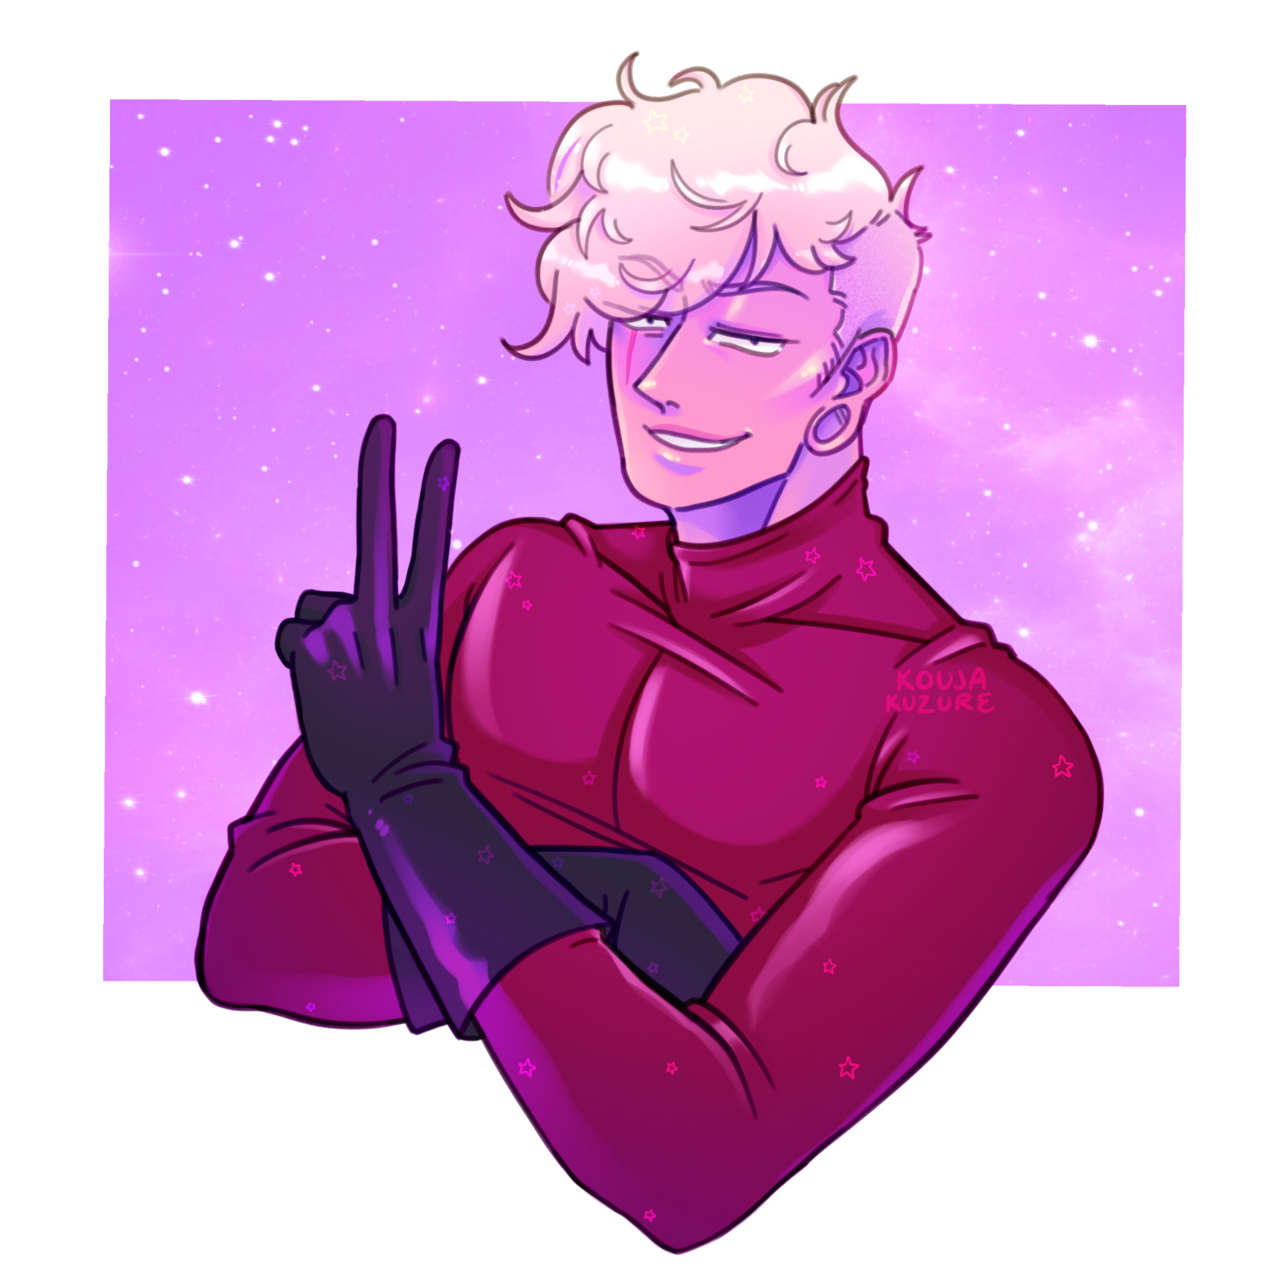 ✧･ﾟ: *✧･ﾟ:* captain lars *:･ﾟ✧*:･ﾟ✧ “(also titled: i forgot to post this but a couple weeks ago i finally got all caught up with the past few steven bombs aaanddd Very Big Yes.) ”